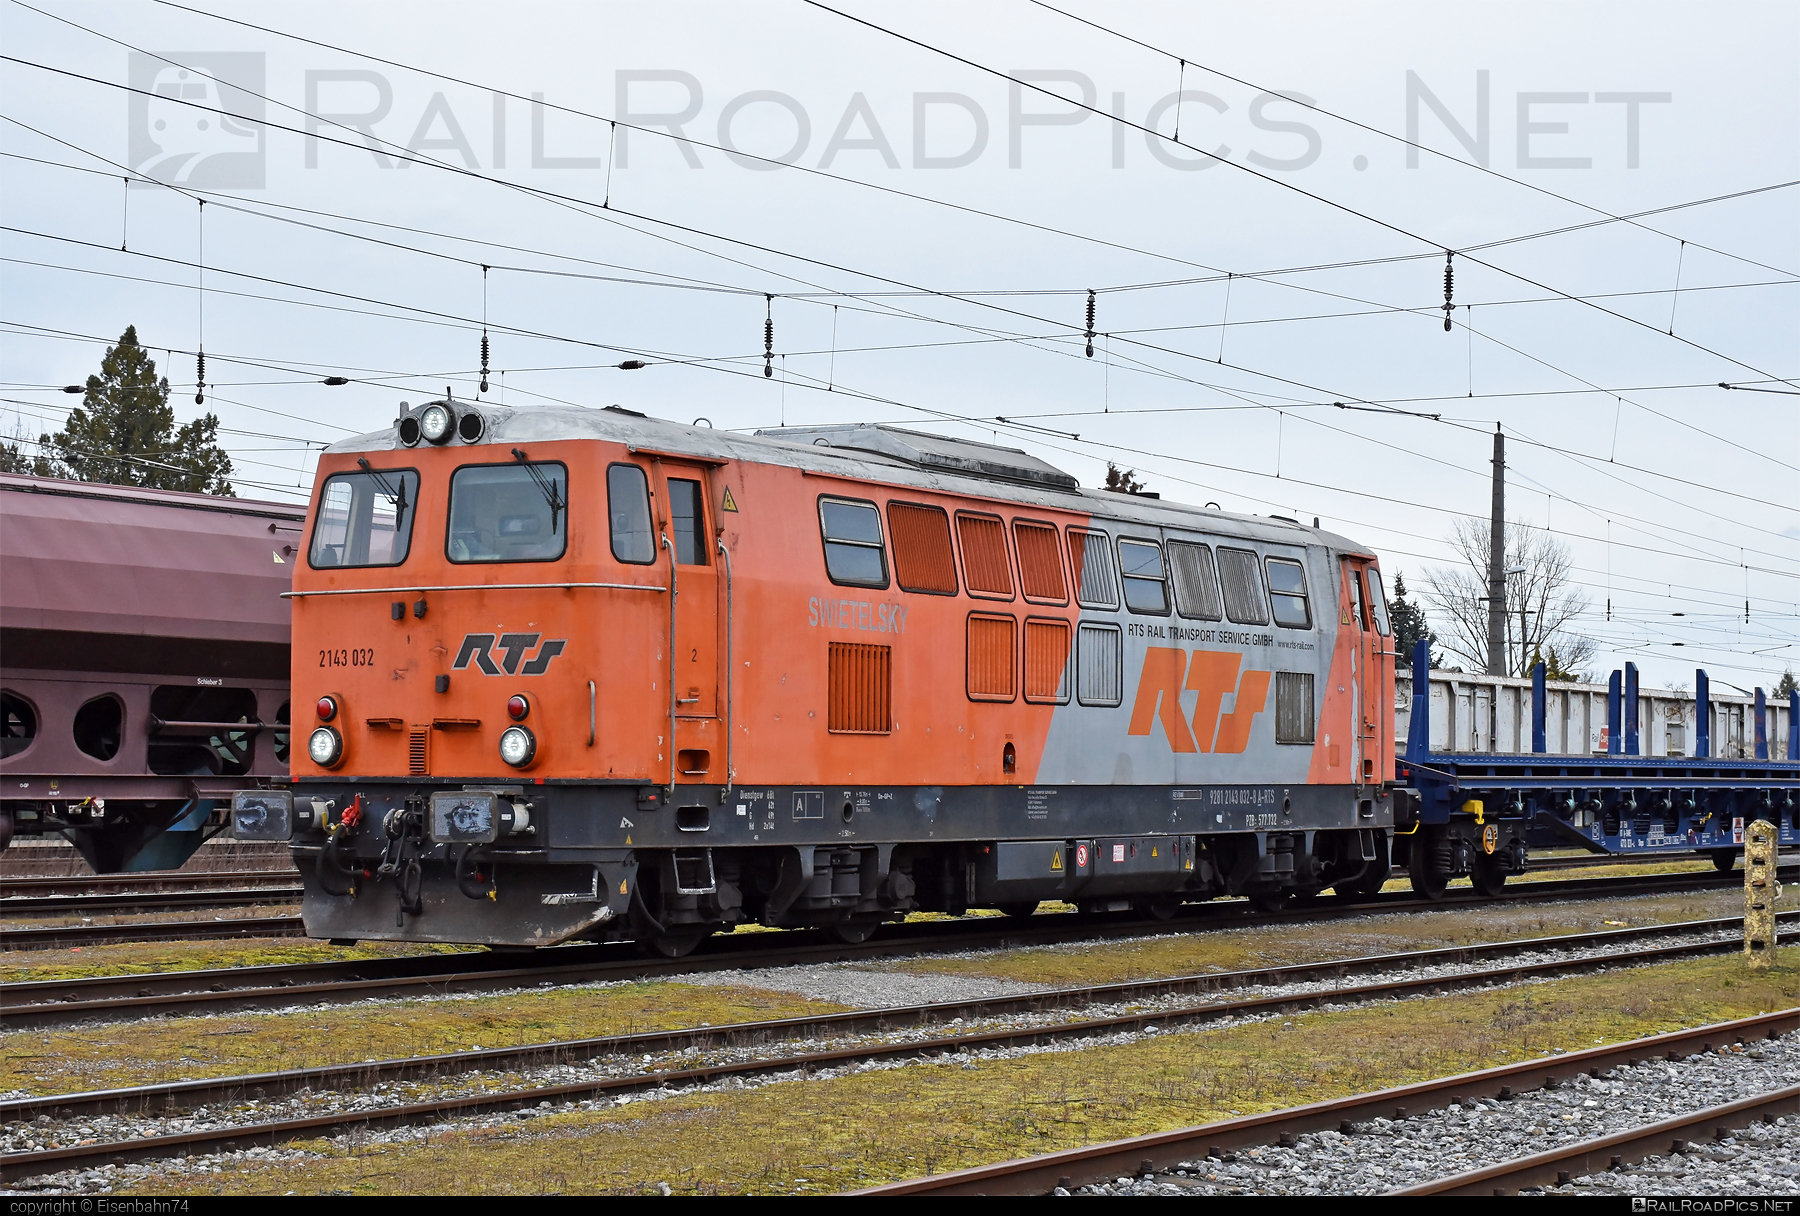 SGP 2143 - 2143 032 operated by RTS Rail Transport Service GmbH #obb2143 #obbClass2143 #railtransportservicegmbh #rts #rtsrailtransportservice #sgp #sgp2143 #simmeringgrazpauker #swietelsky